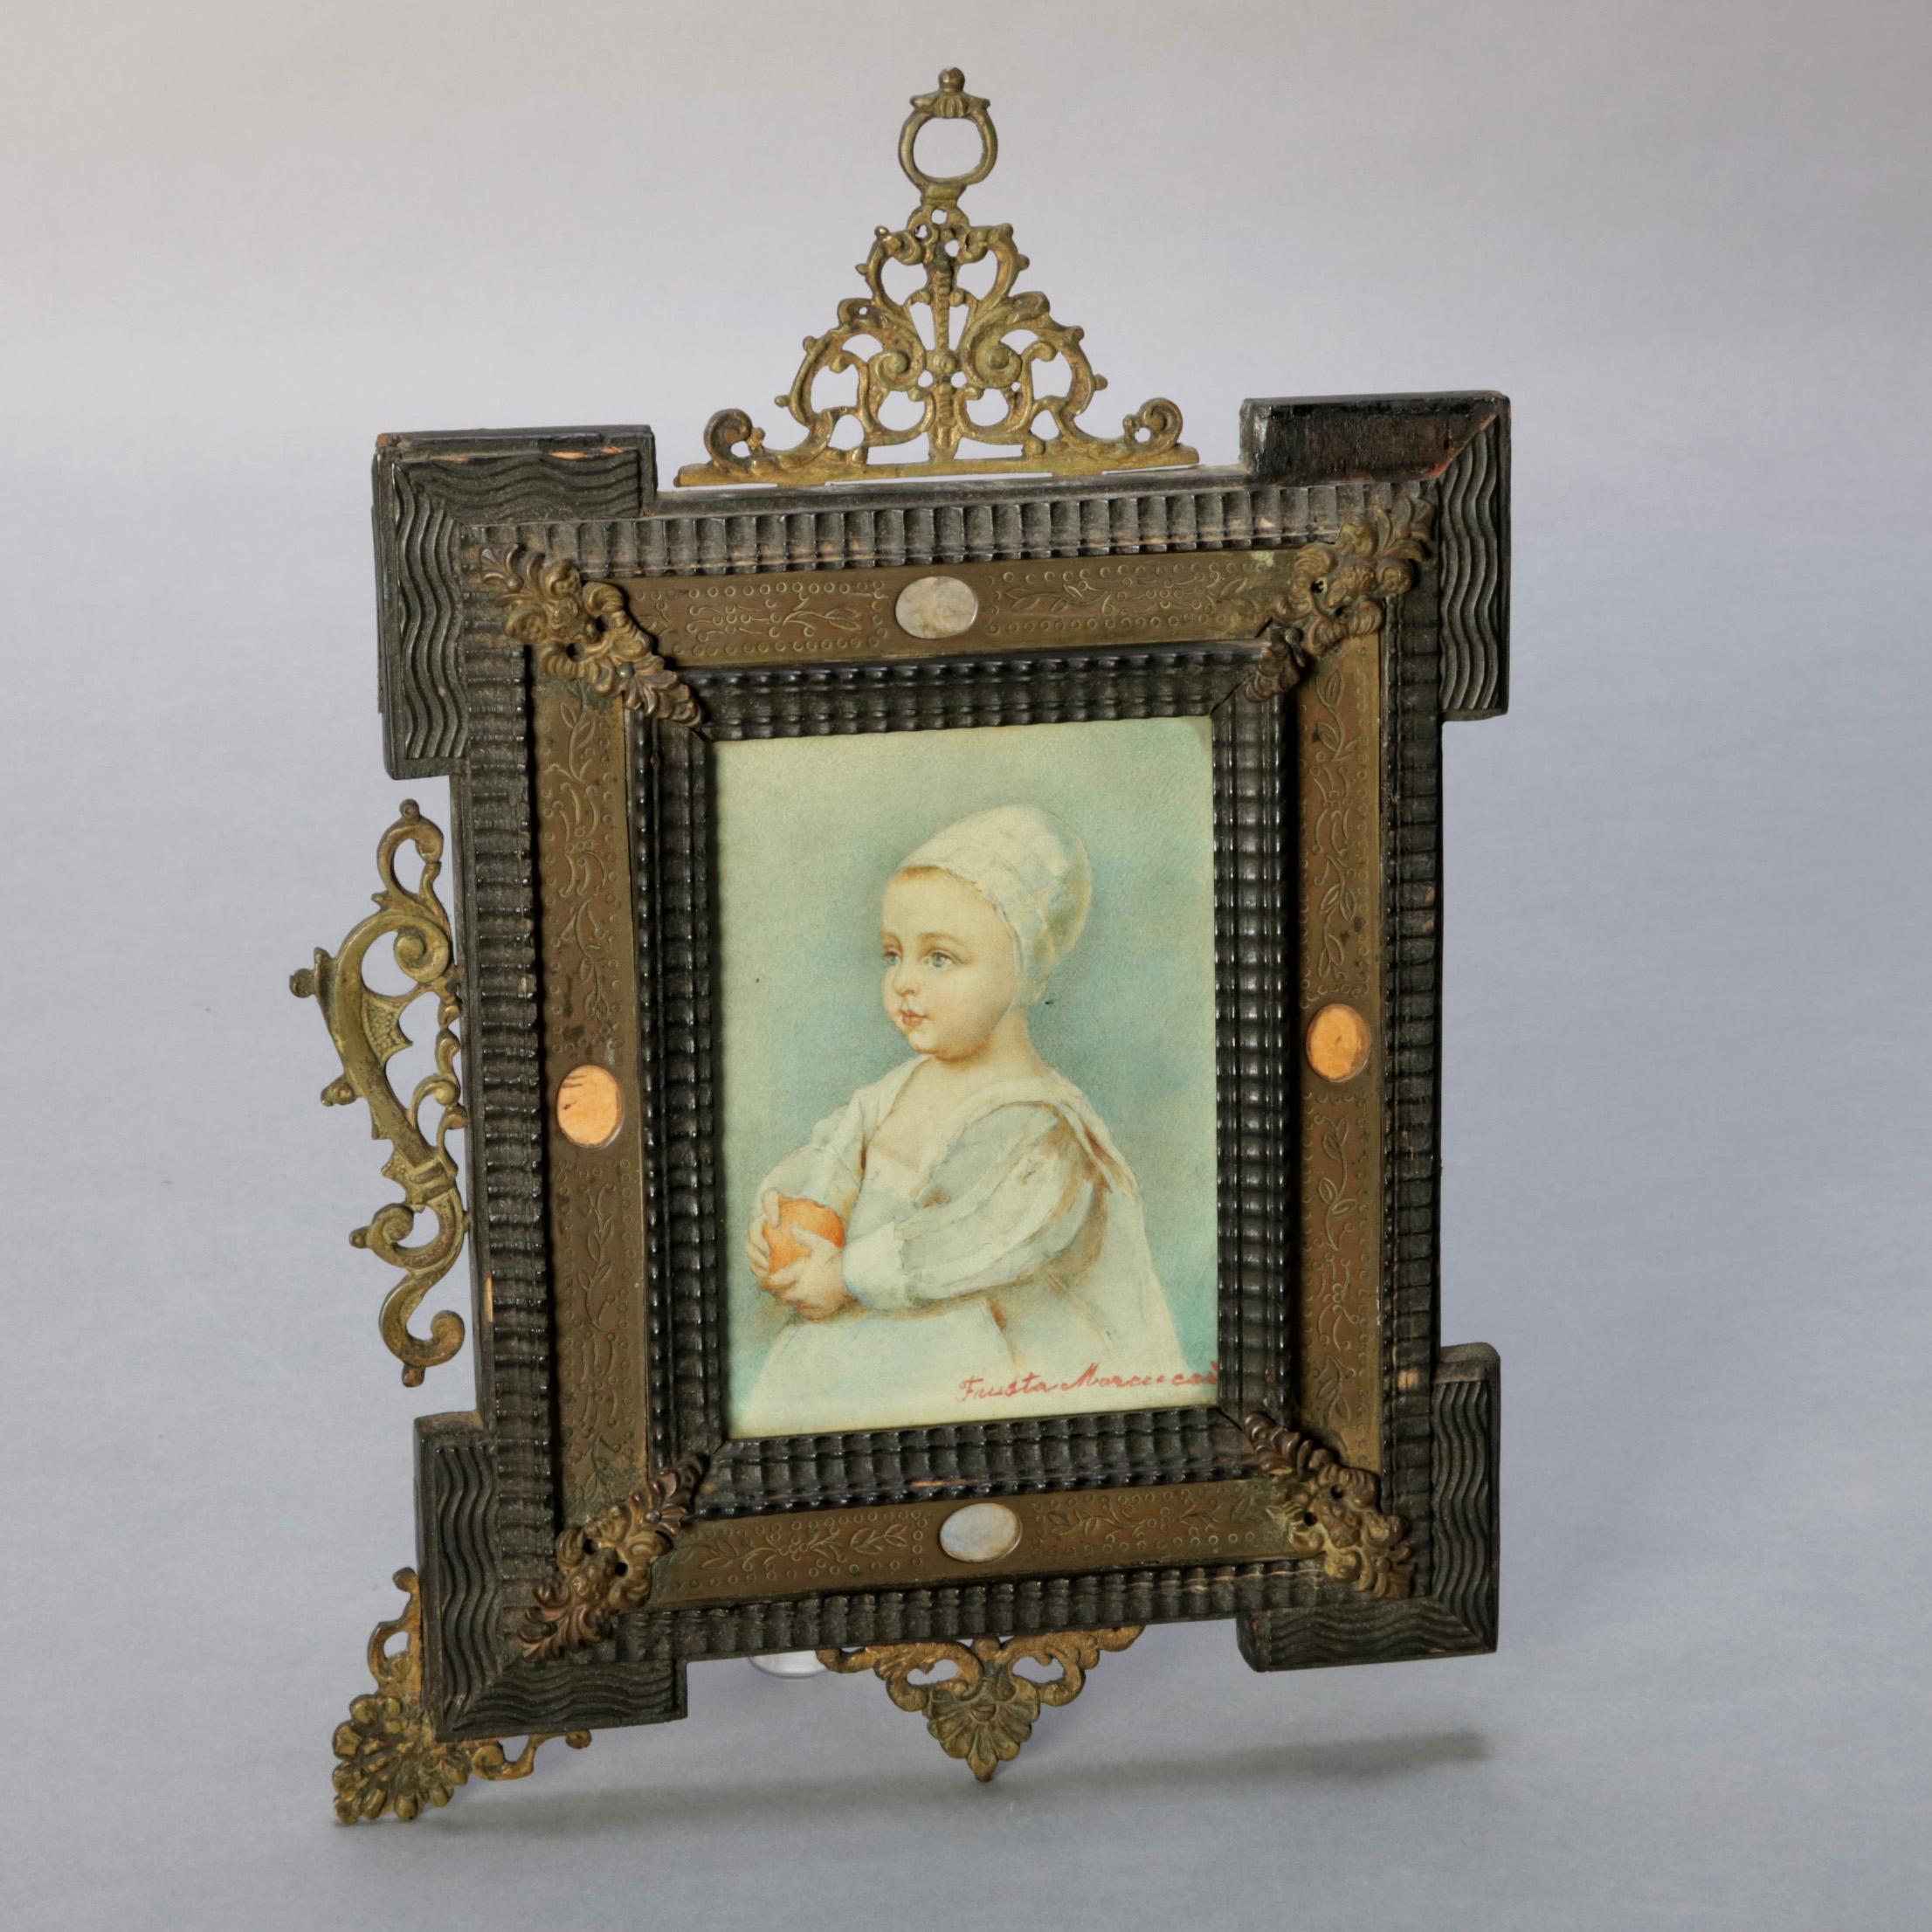 Folk Art Antique French Miniature Signed Watercolor Portrait in Carved Frame 19th Century